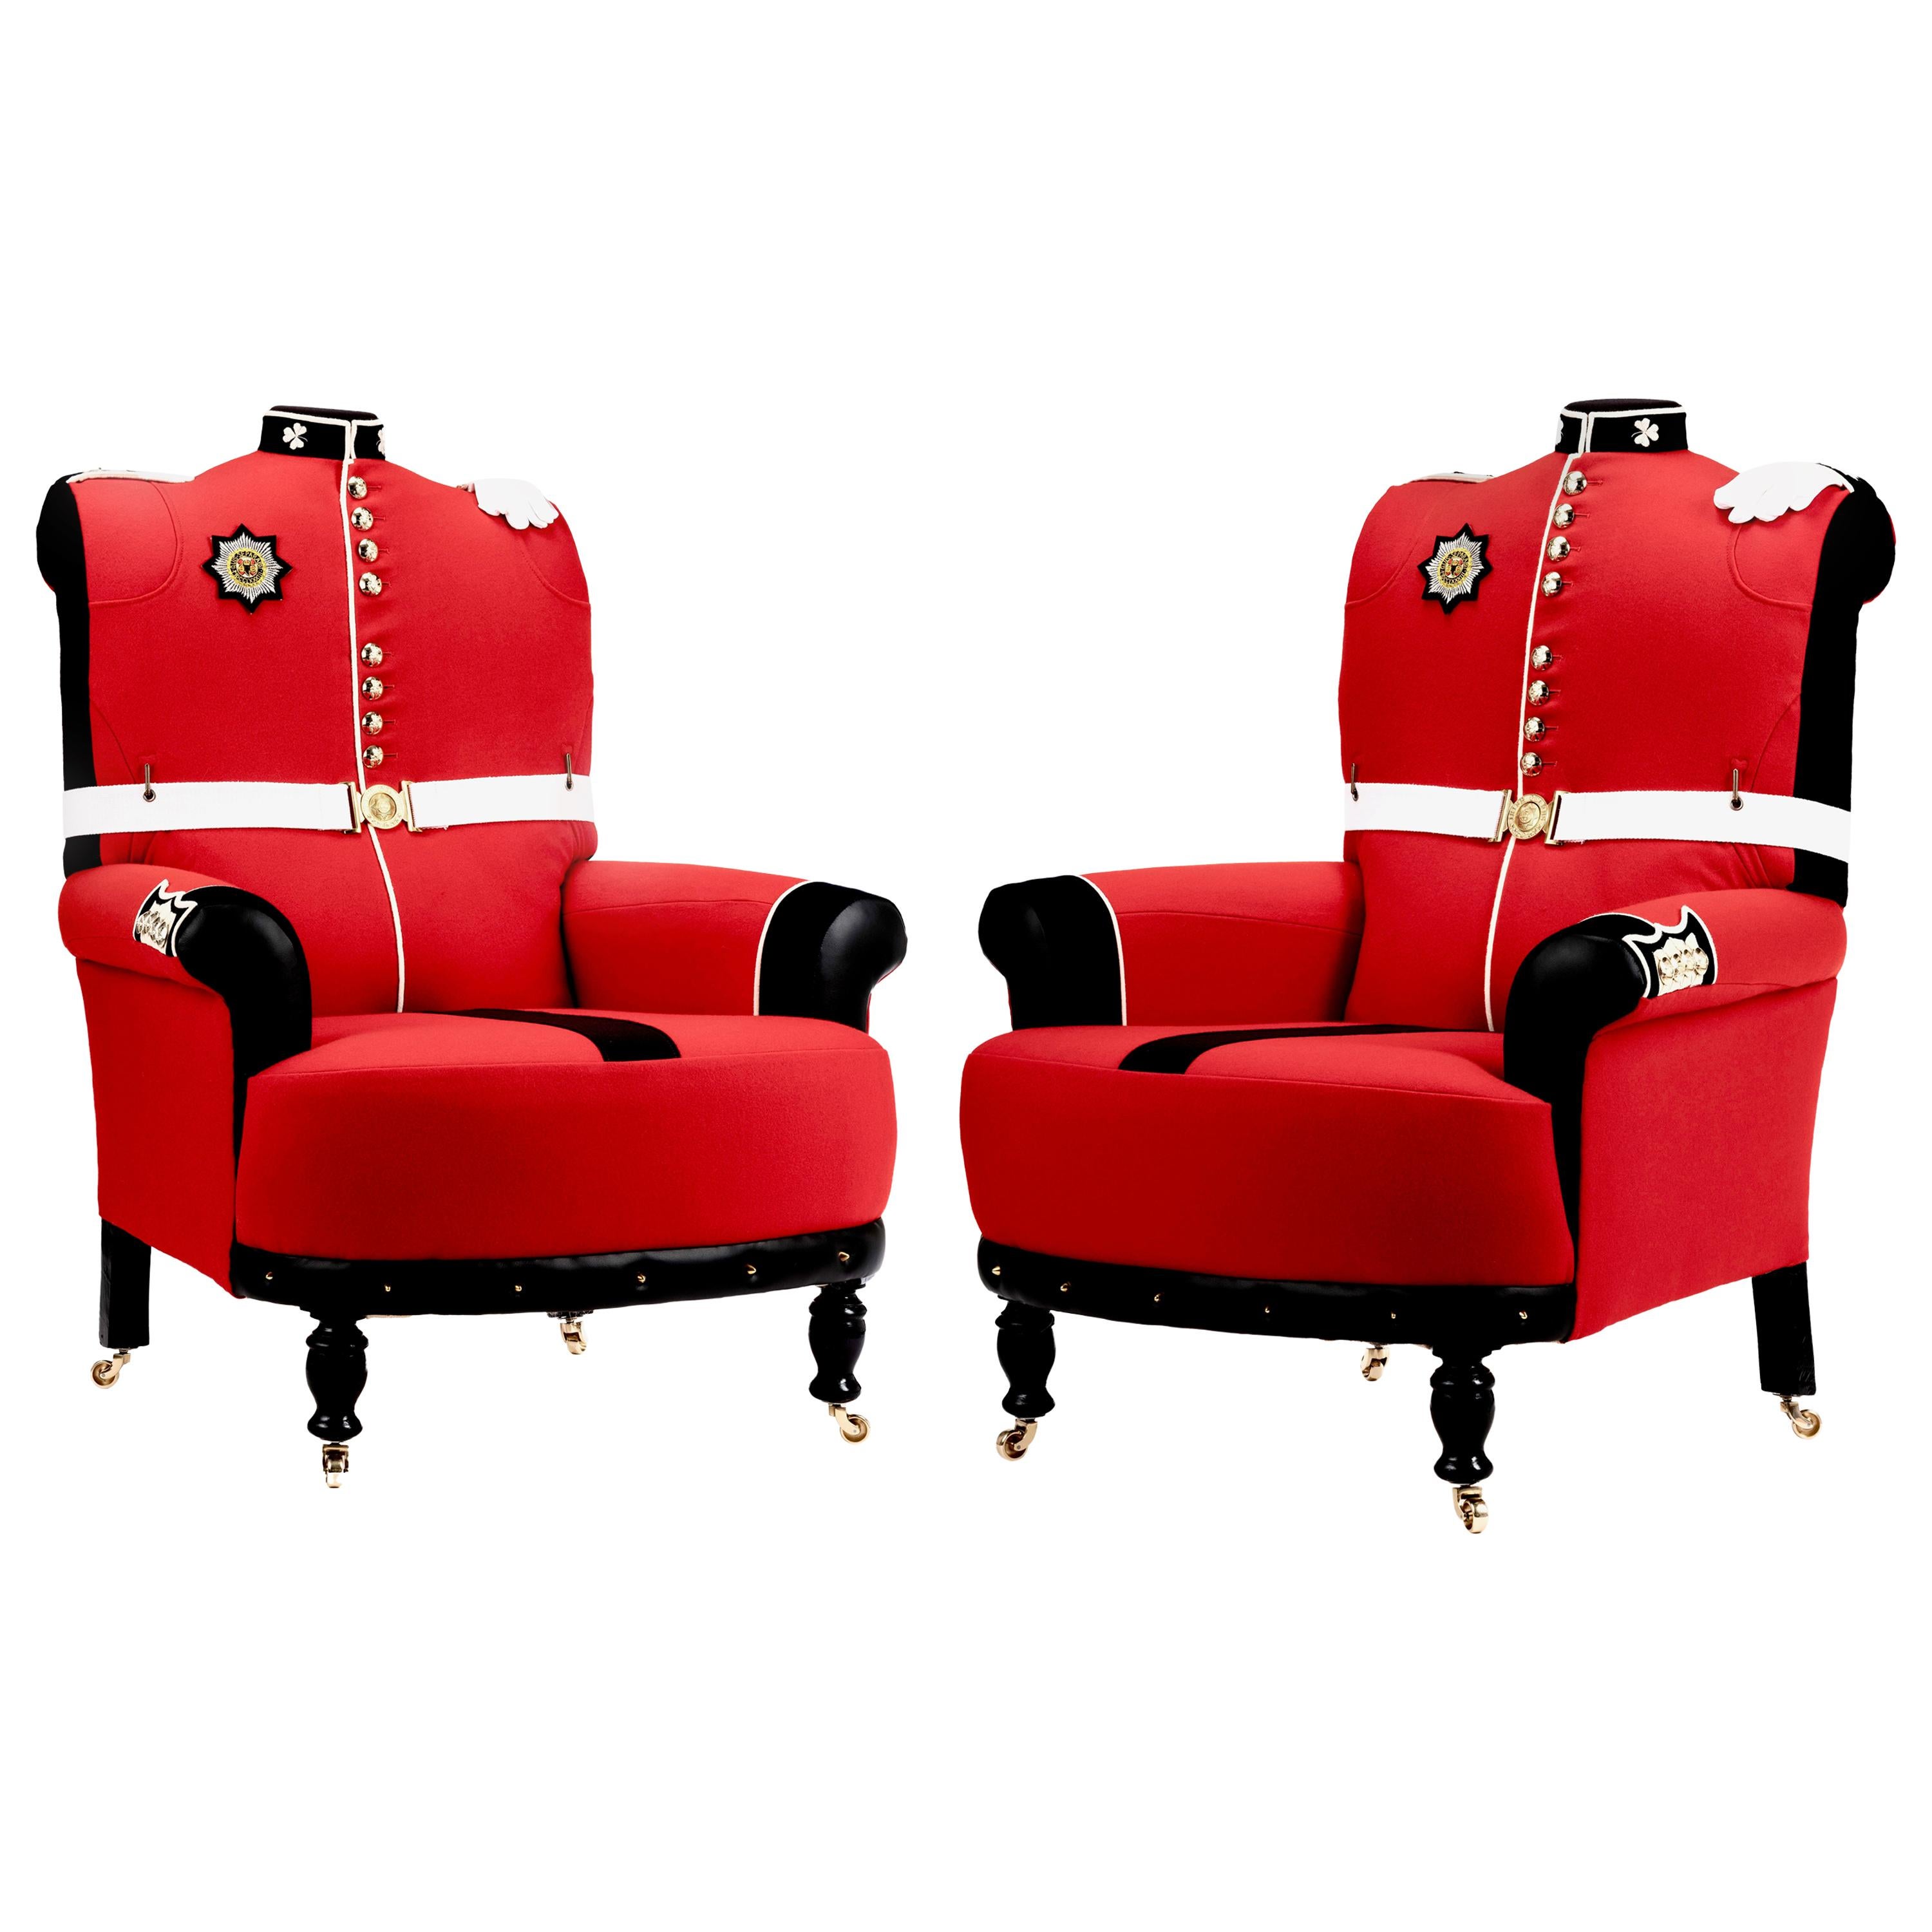 'The Irish Guards’ Pair of Victorian Wing Back Armchairs, circa 1890